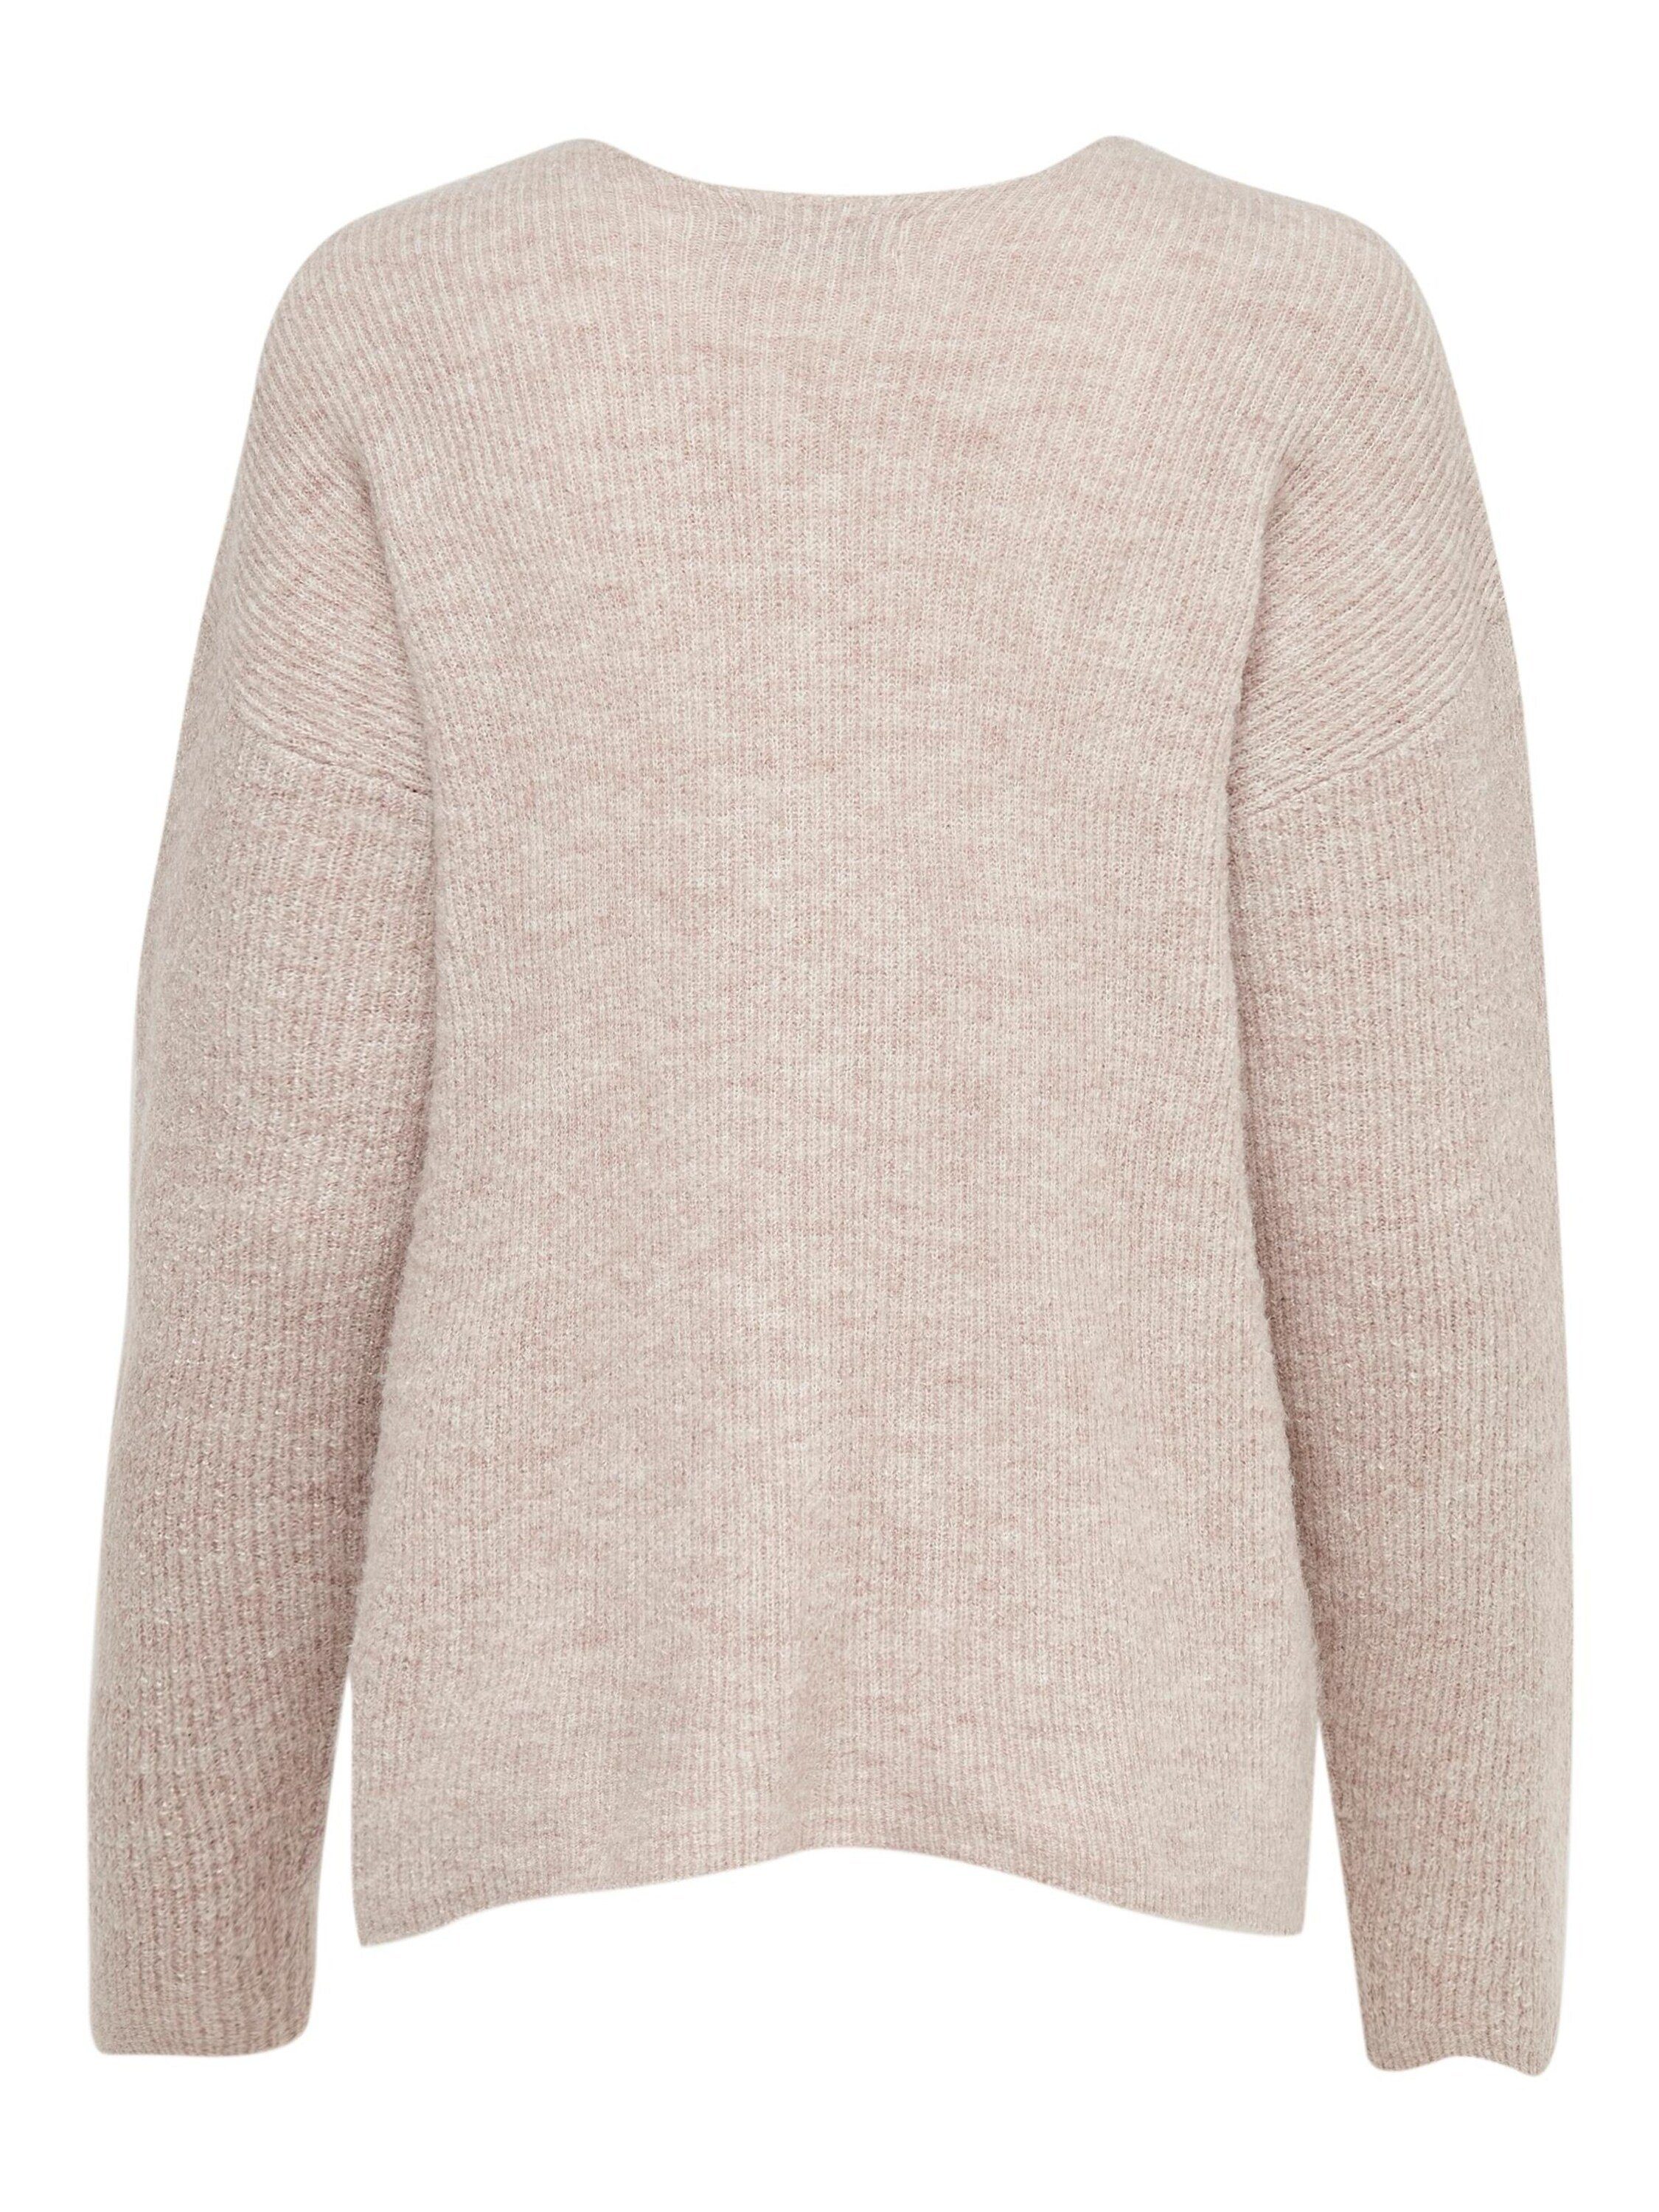 Details stone Strickpullover pumice Camilla (1-tlg) Plain/ohne ONLY